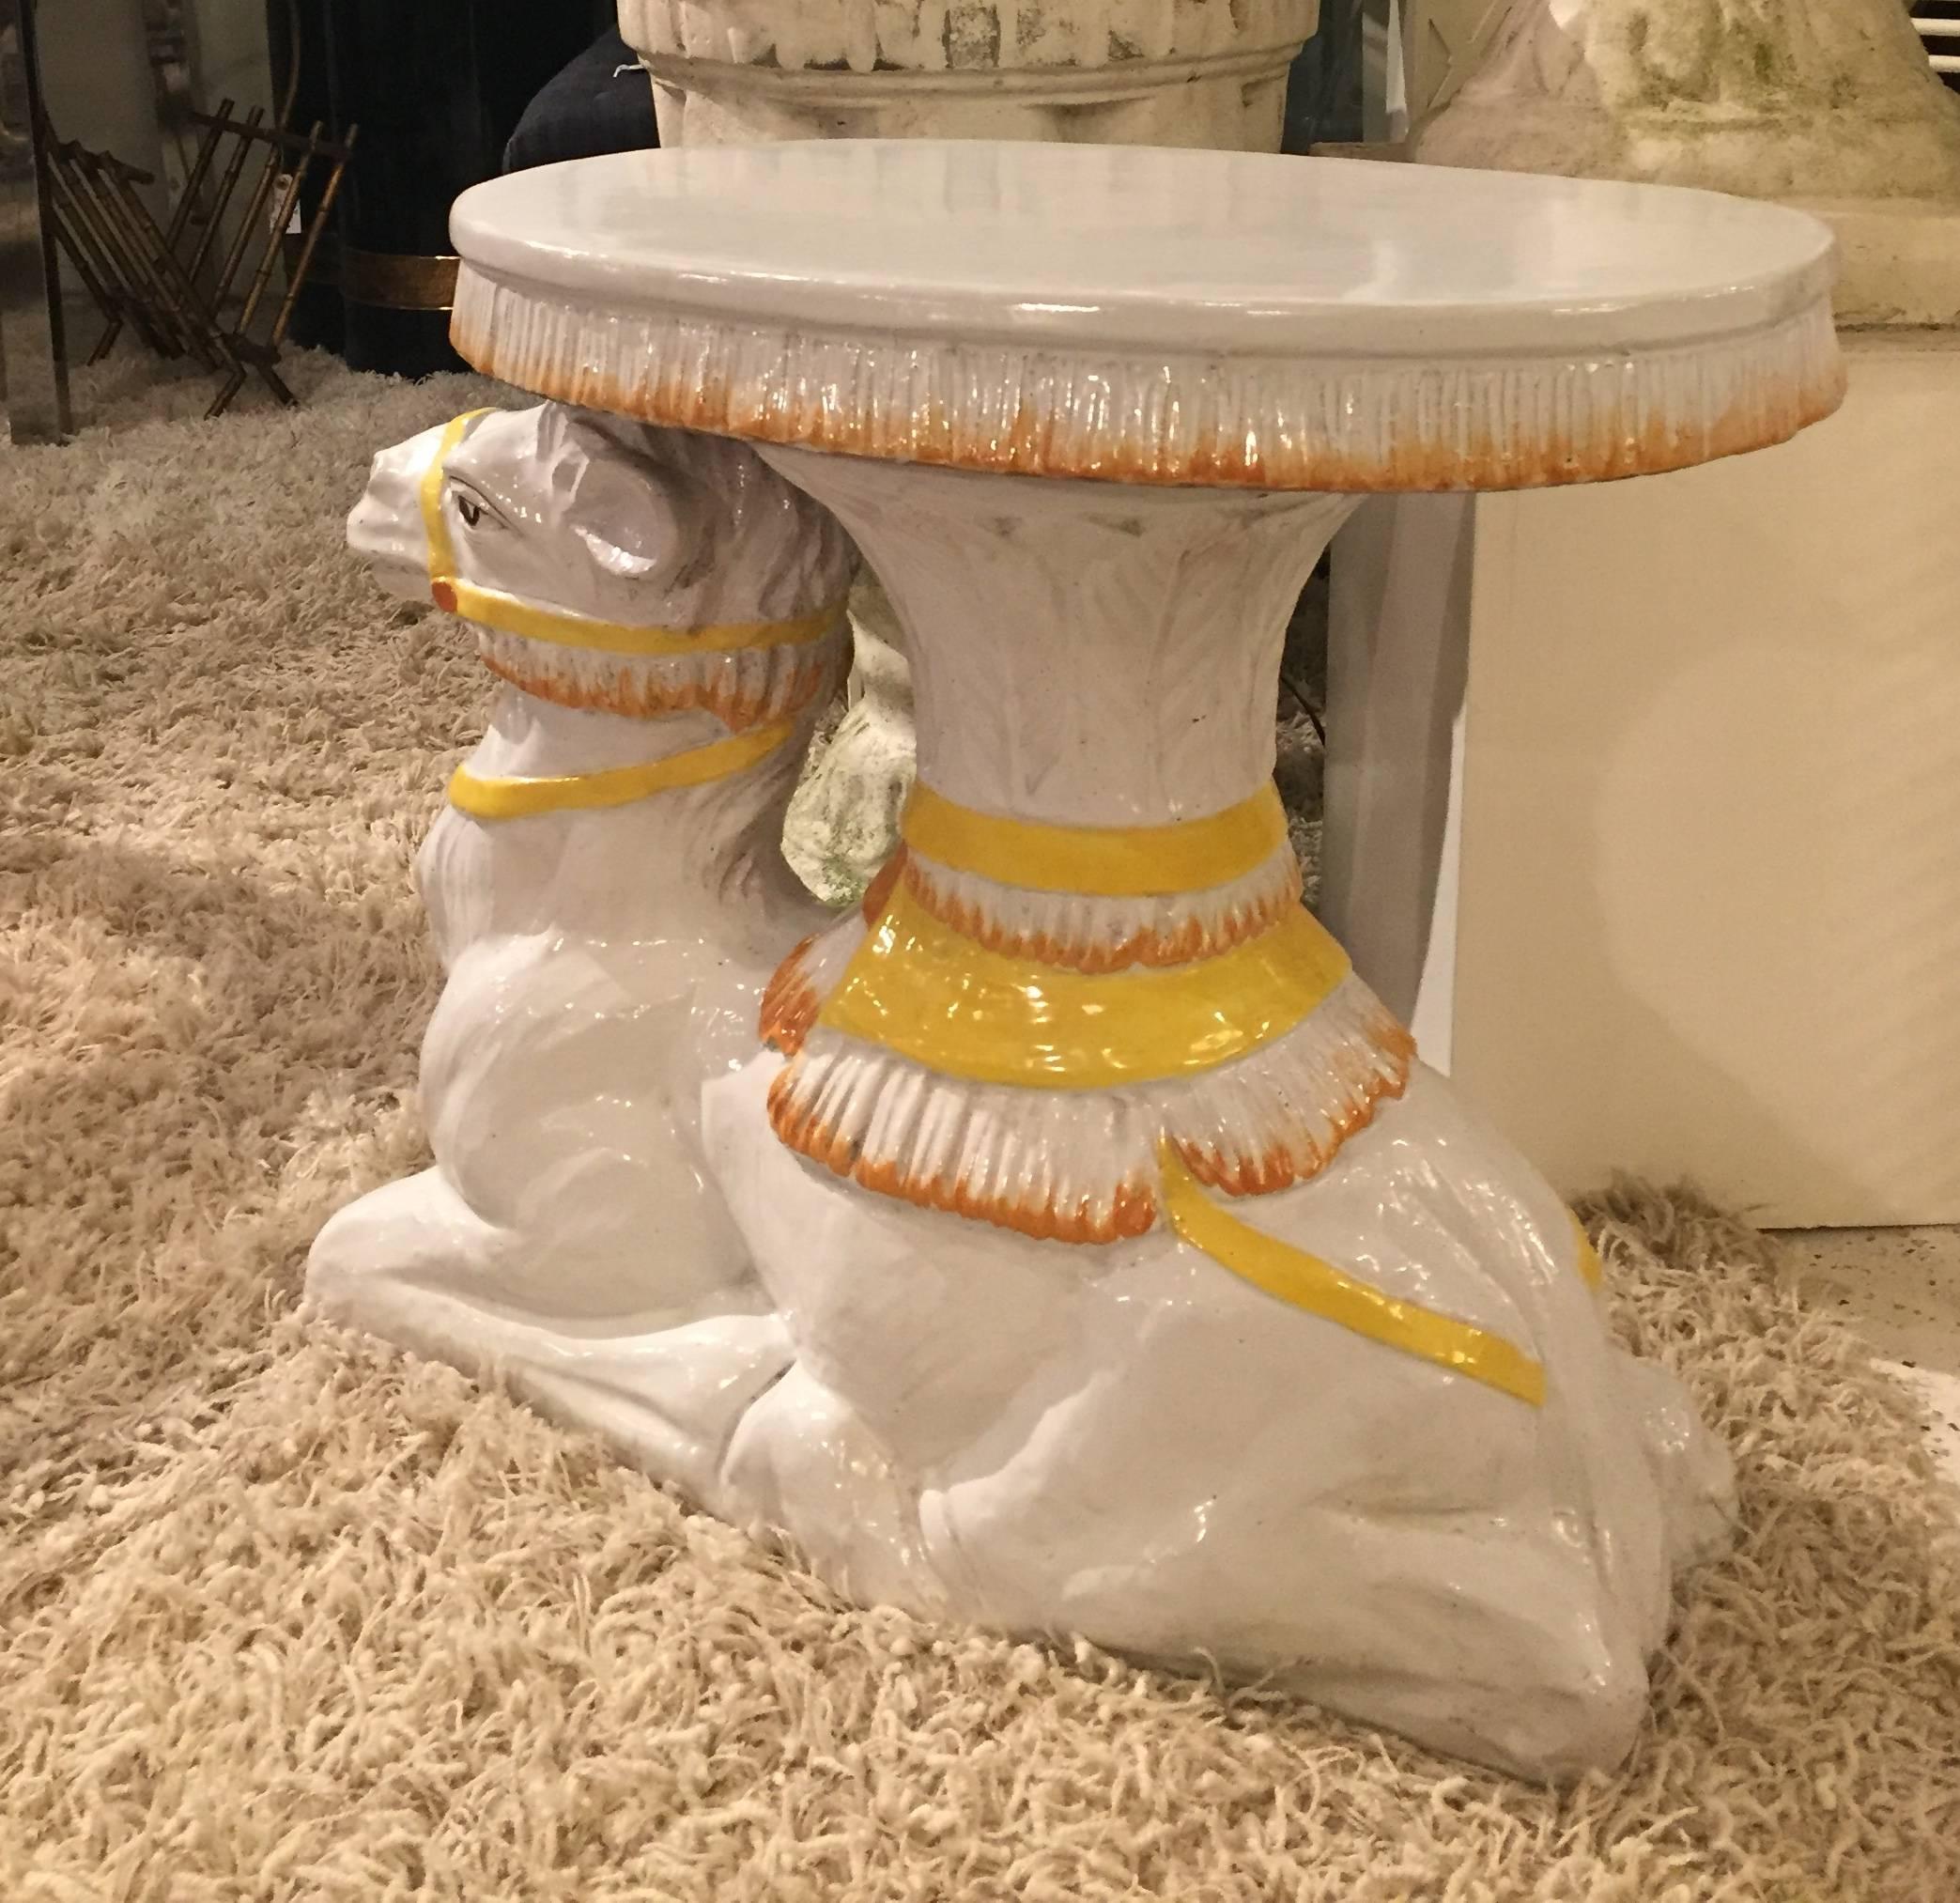 Fabulous Tony Duquette style chic side table or drinks table garden seat in the shape of a reclining camel. Glazed and painted terra cotta.
Measure: Top is 21 L x 12.5 D
Base 23 L x 10 W.